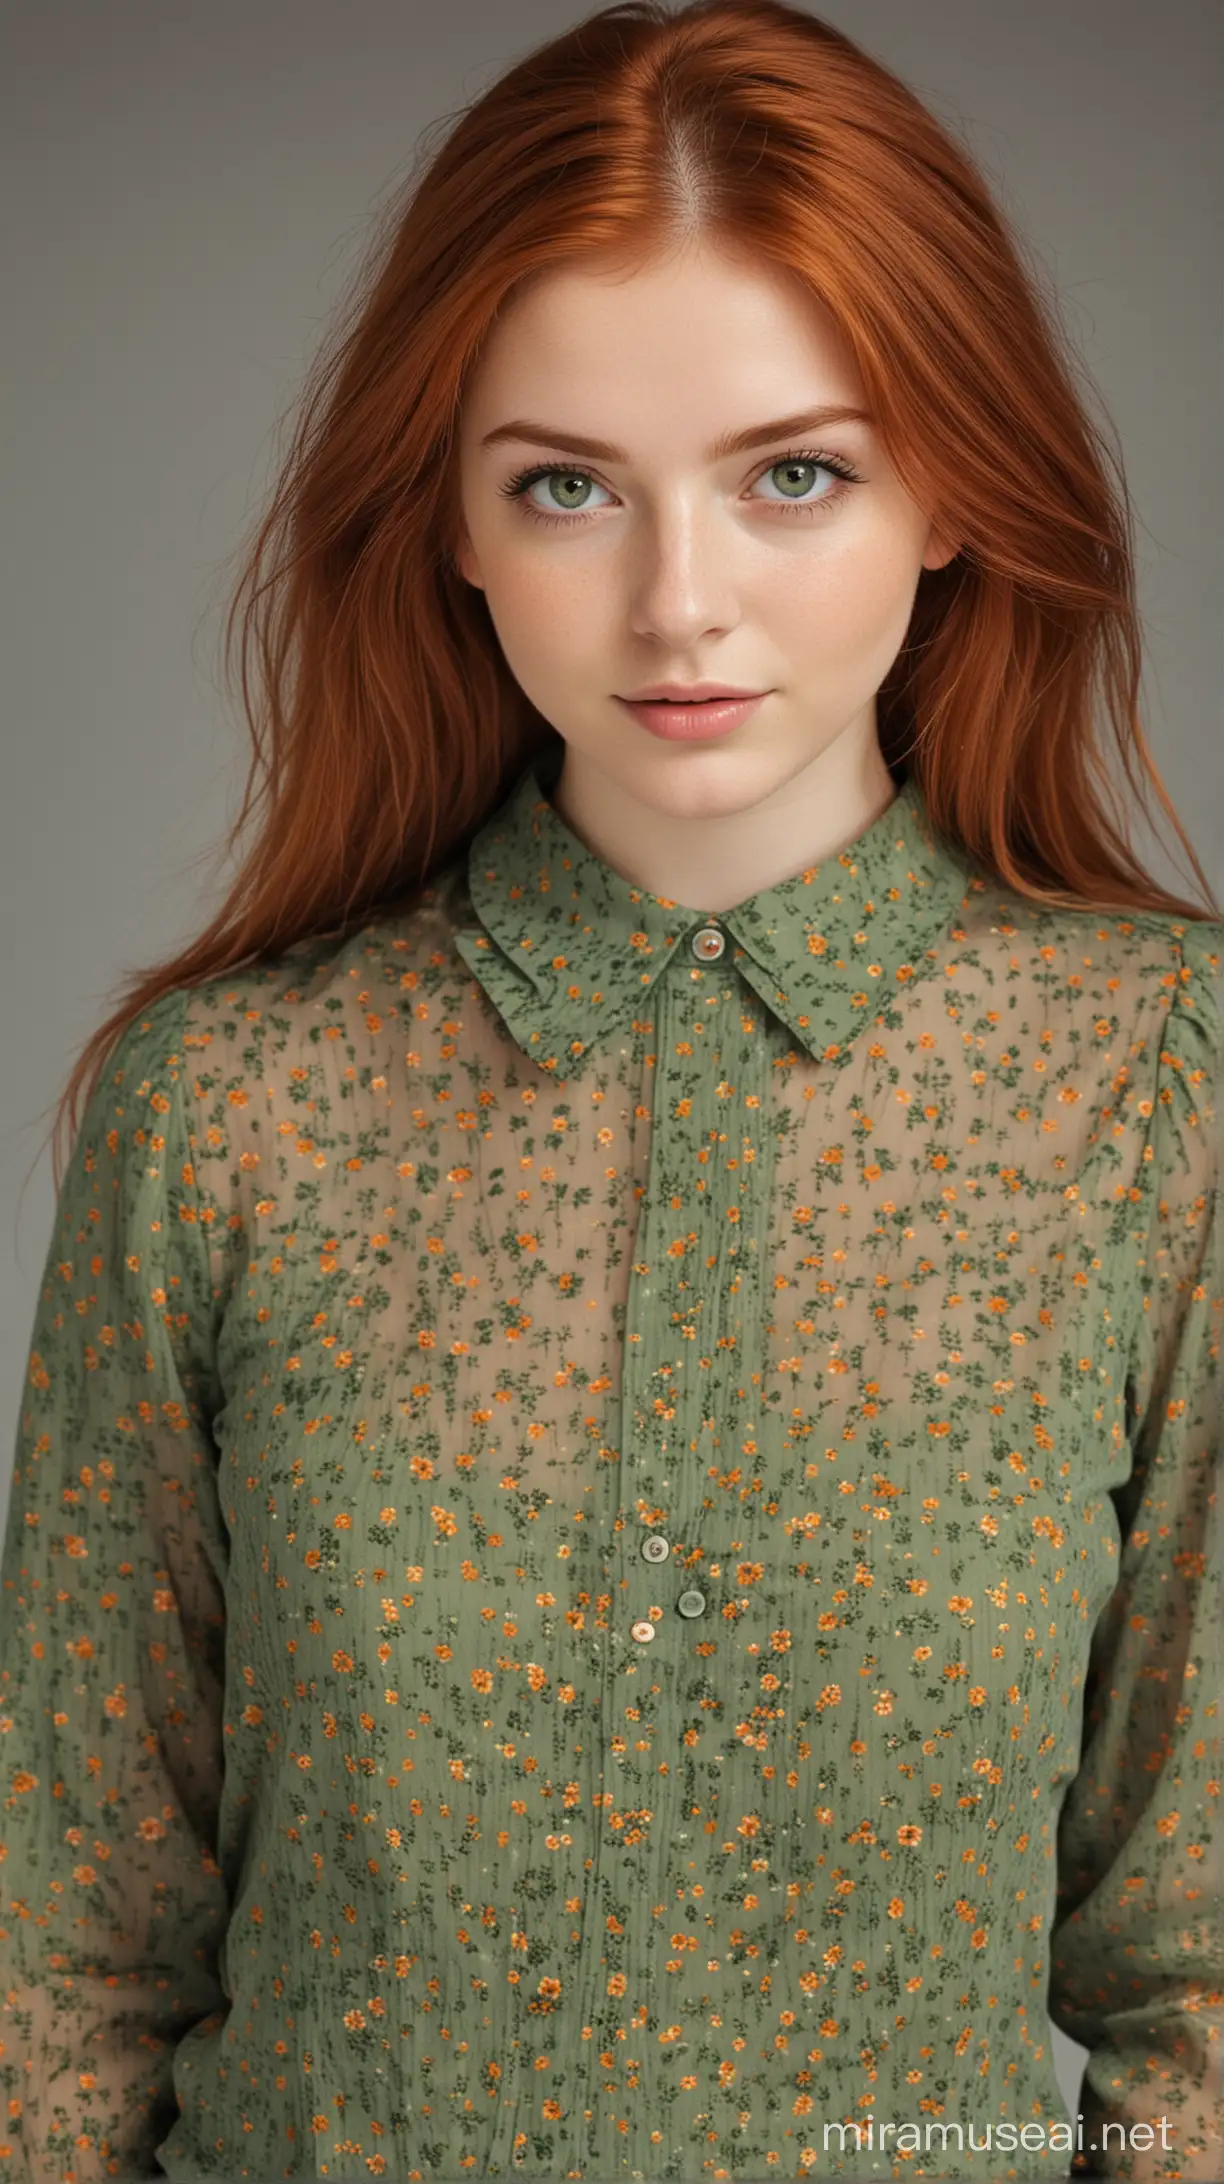 Red hair and green eyes 21 years old pretty girl wearing a long sleeve blouse and a skirt.